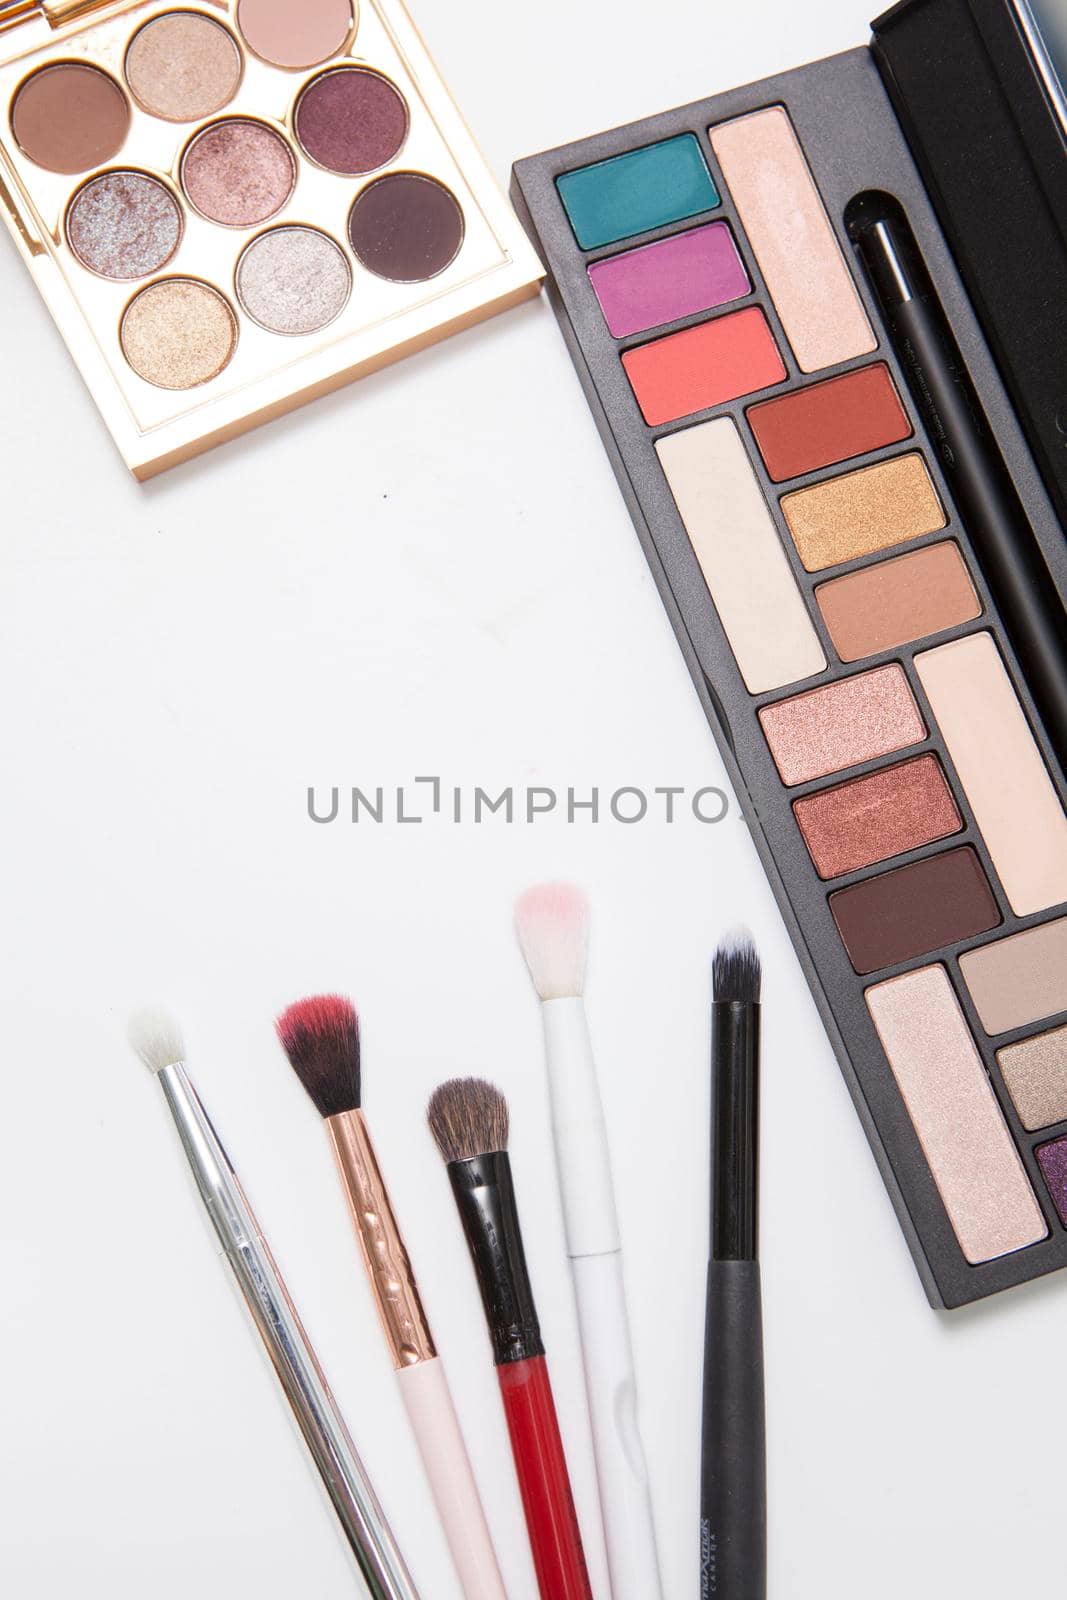 Vertical shot of eyeshadow palettes and makeup brushes isolated on white